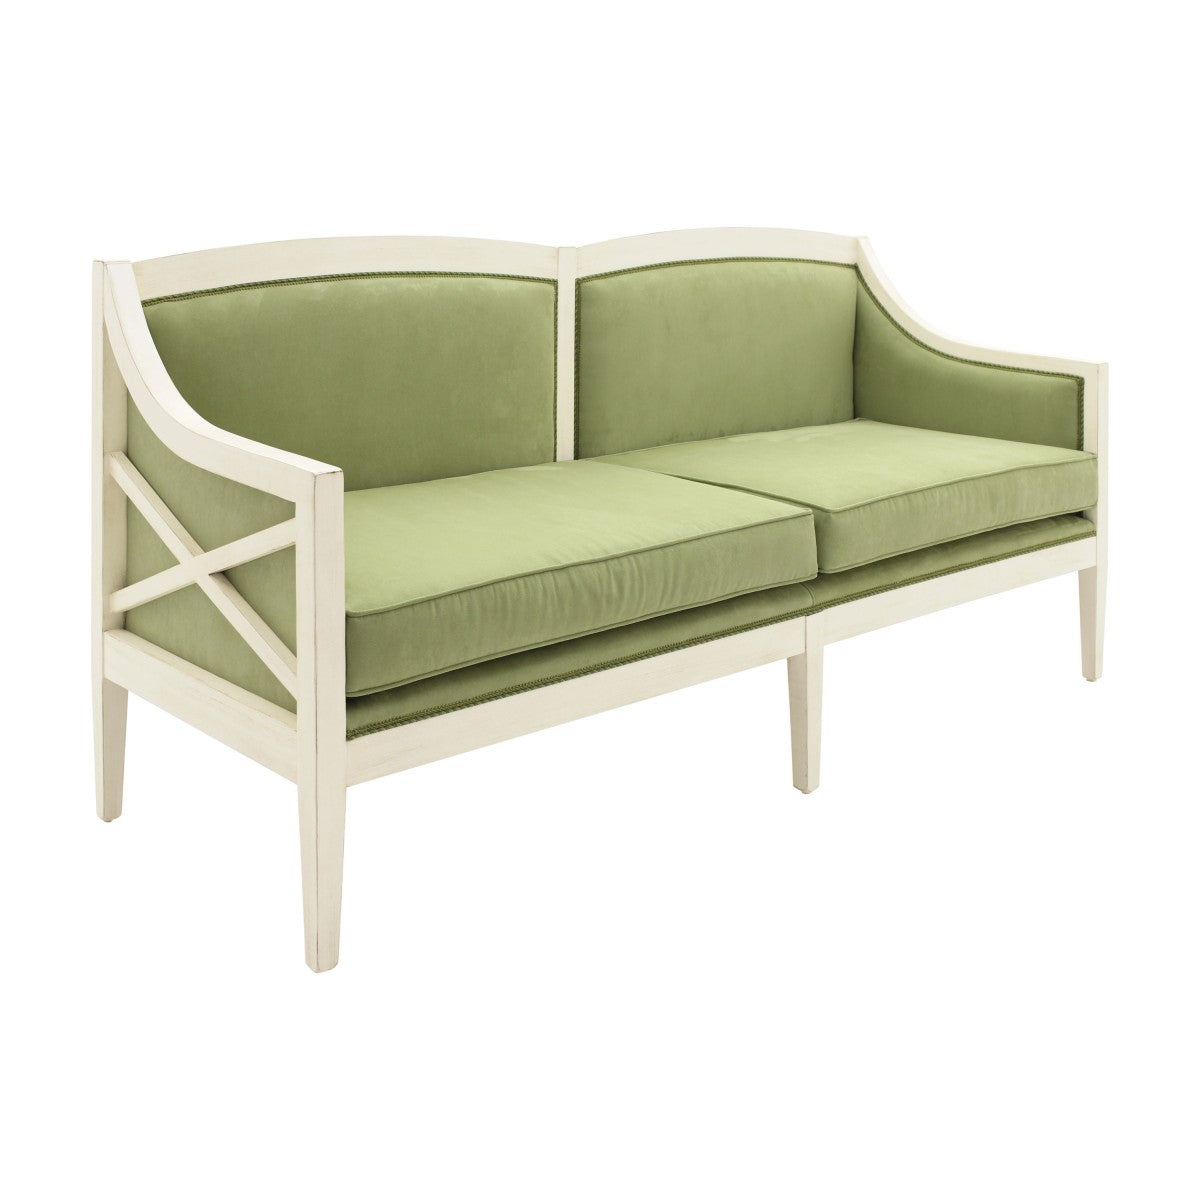 Cesare Bespoke Upholstered Art Deco Style Three Seater Sofa MS9185E Custom Made To Order